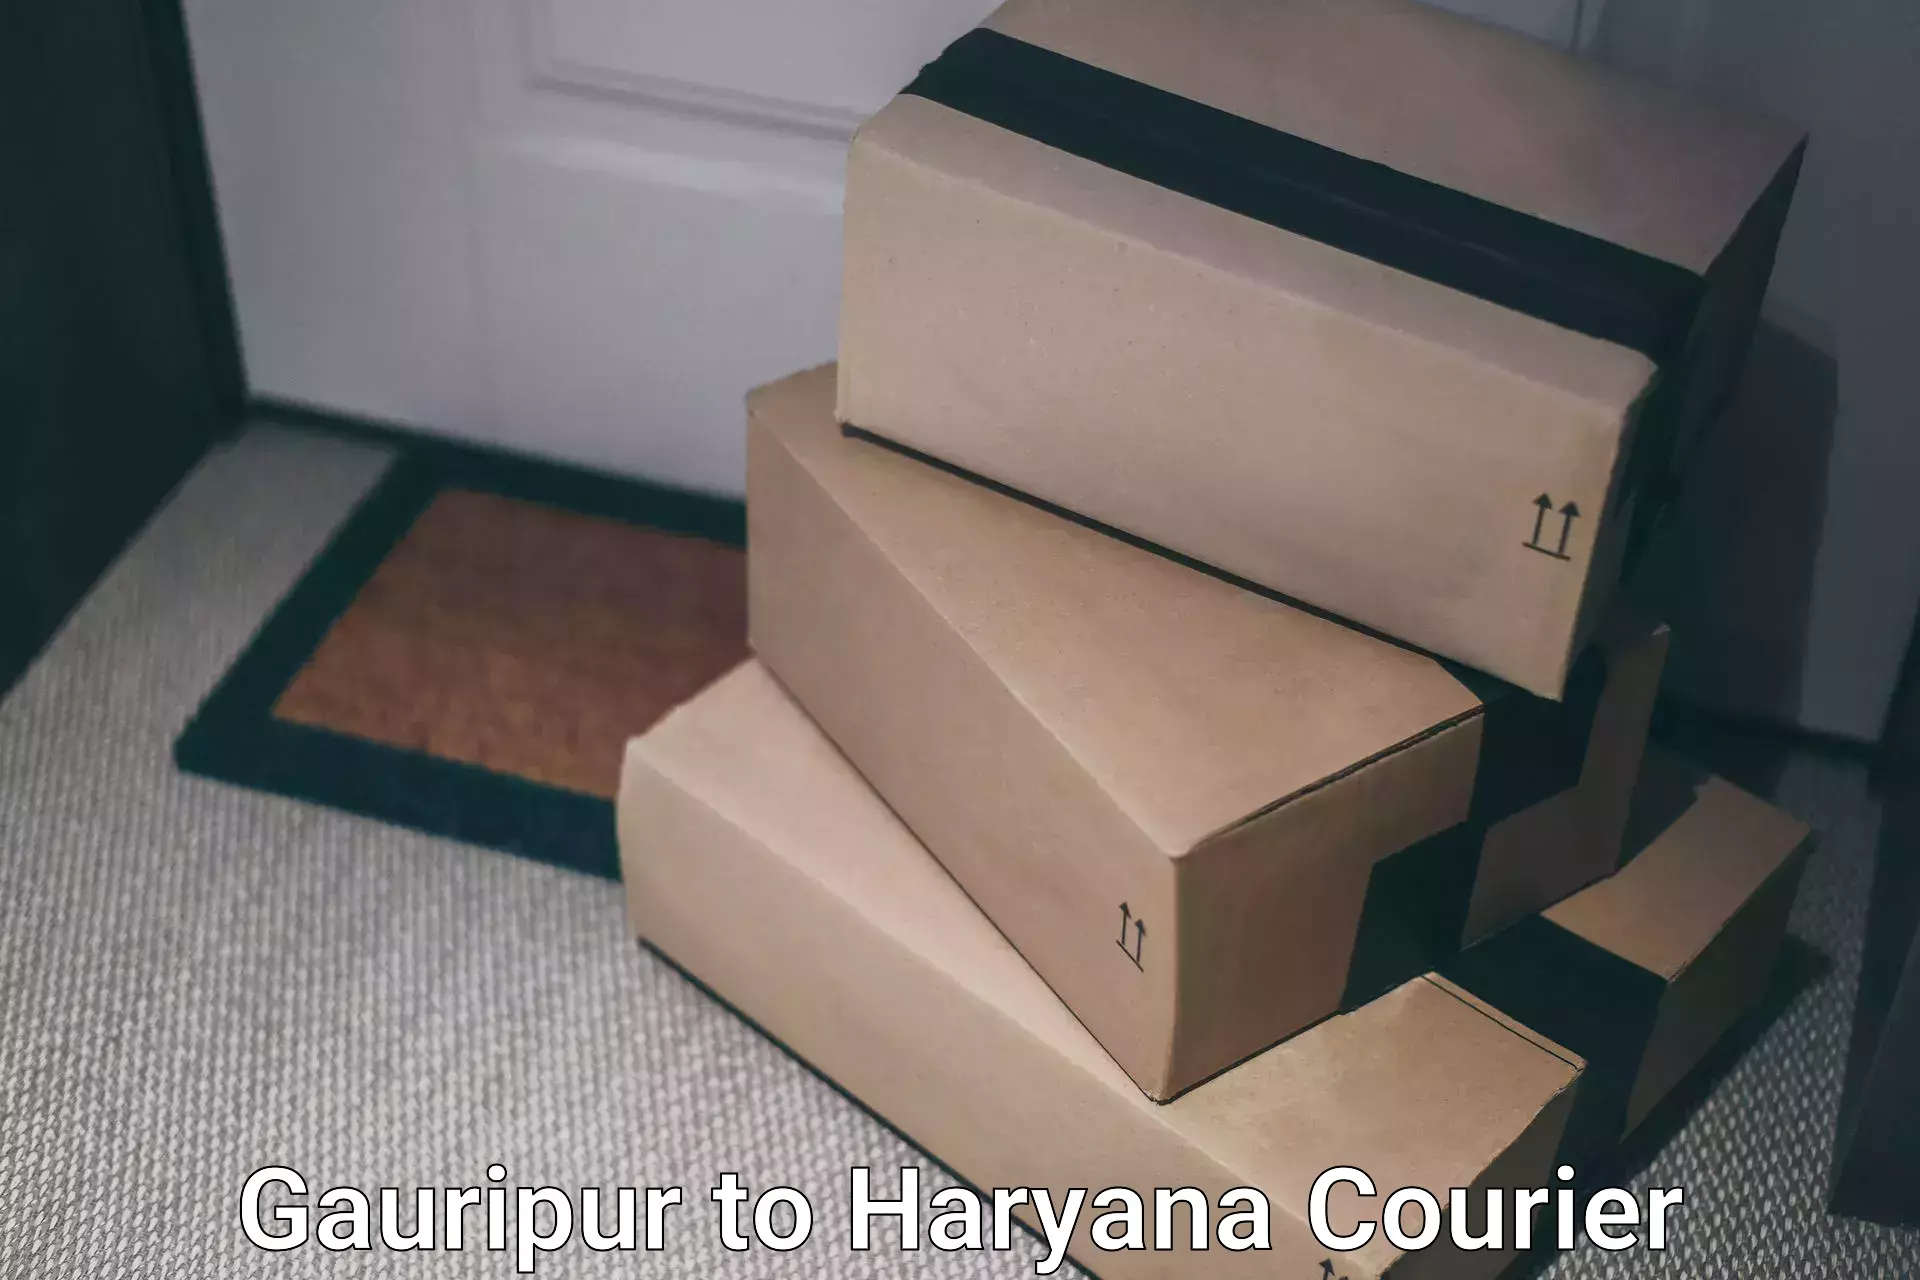 International courier networks Gauripur to Mahendragarh